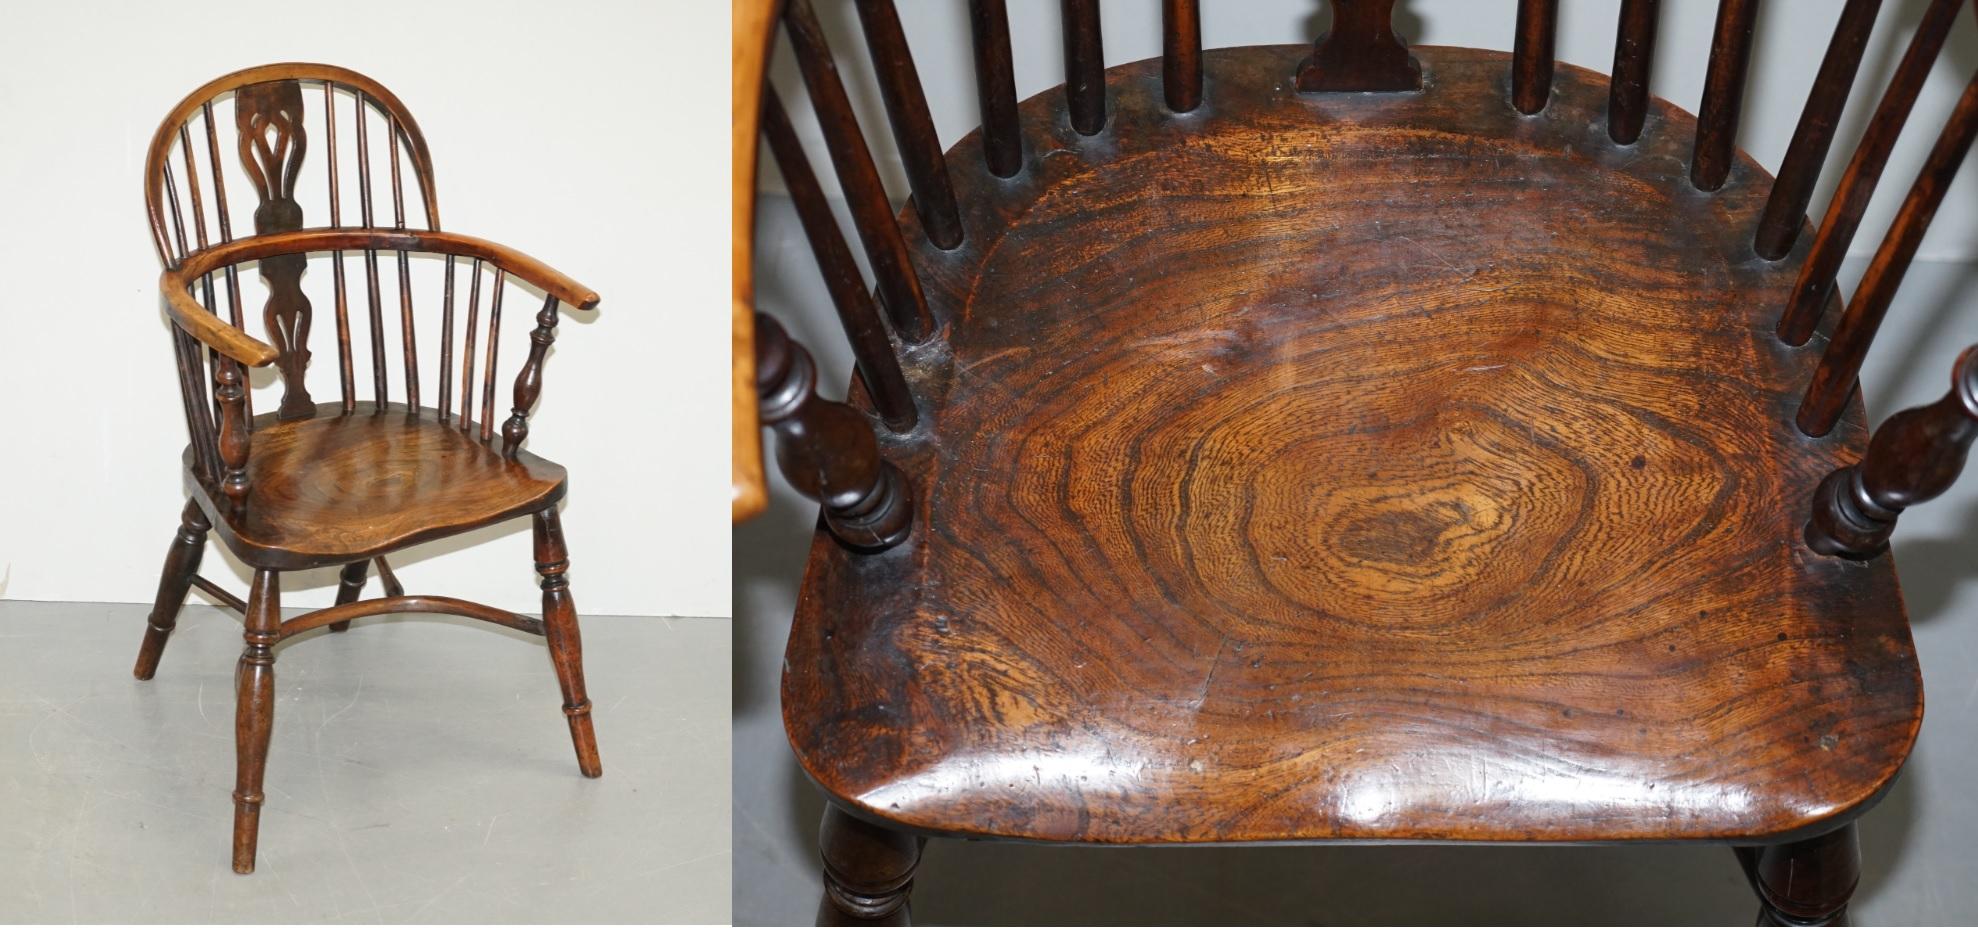 We are delighted to offer for sale 1 of 6 lovely solid Elm hand sawn circa 1860 Windsor stick back armchair

The Antique Windsor chair is a country piece of antique furniture that usually comes with lovely charm and character. They were first seen